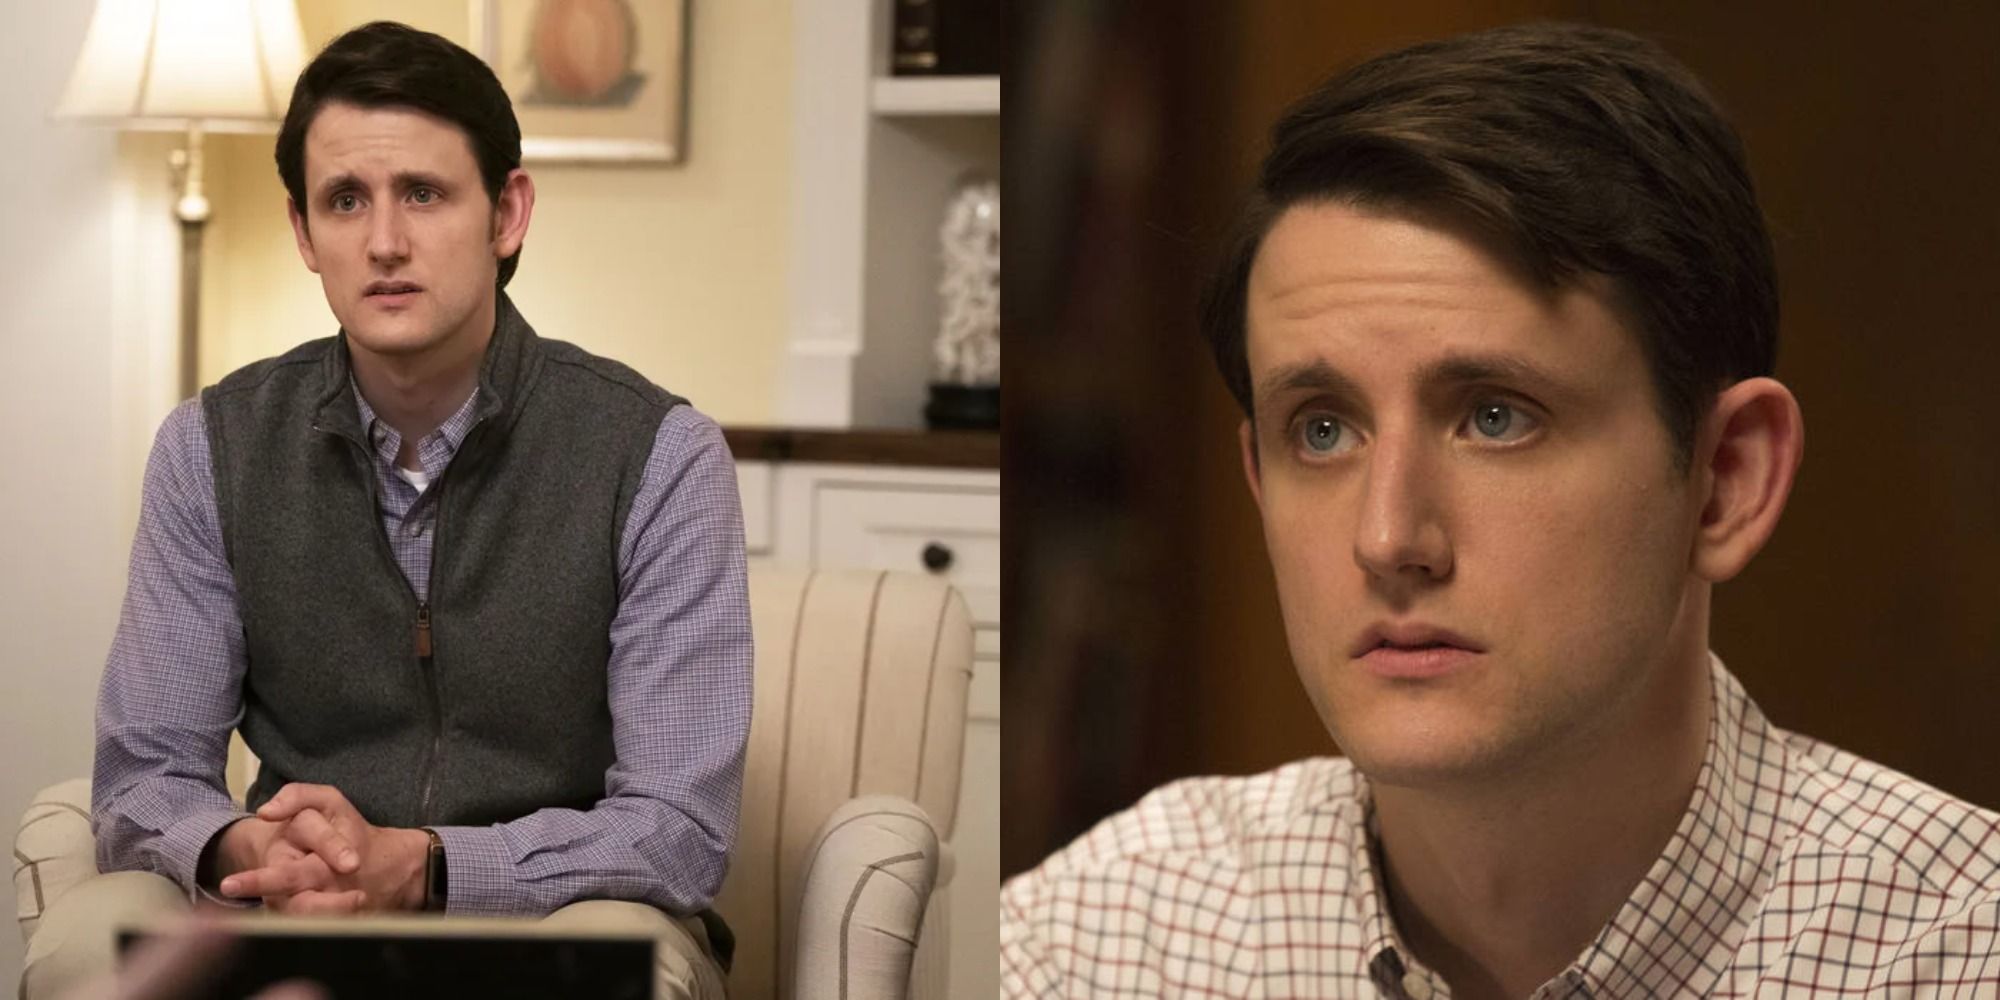 Split image showing Jared in Silicon Valley